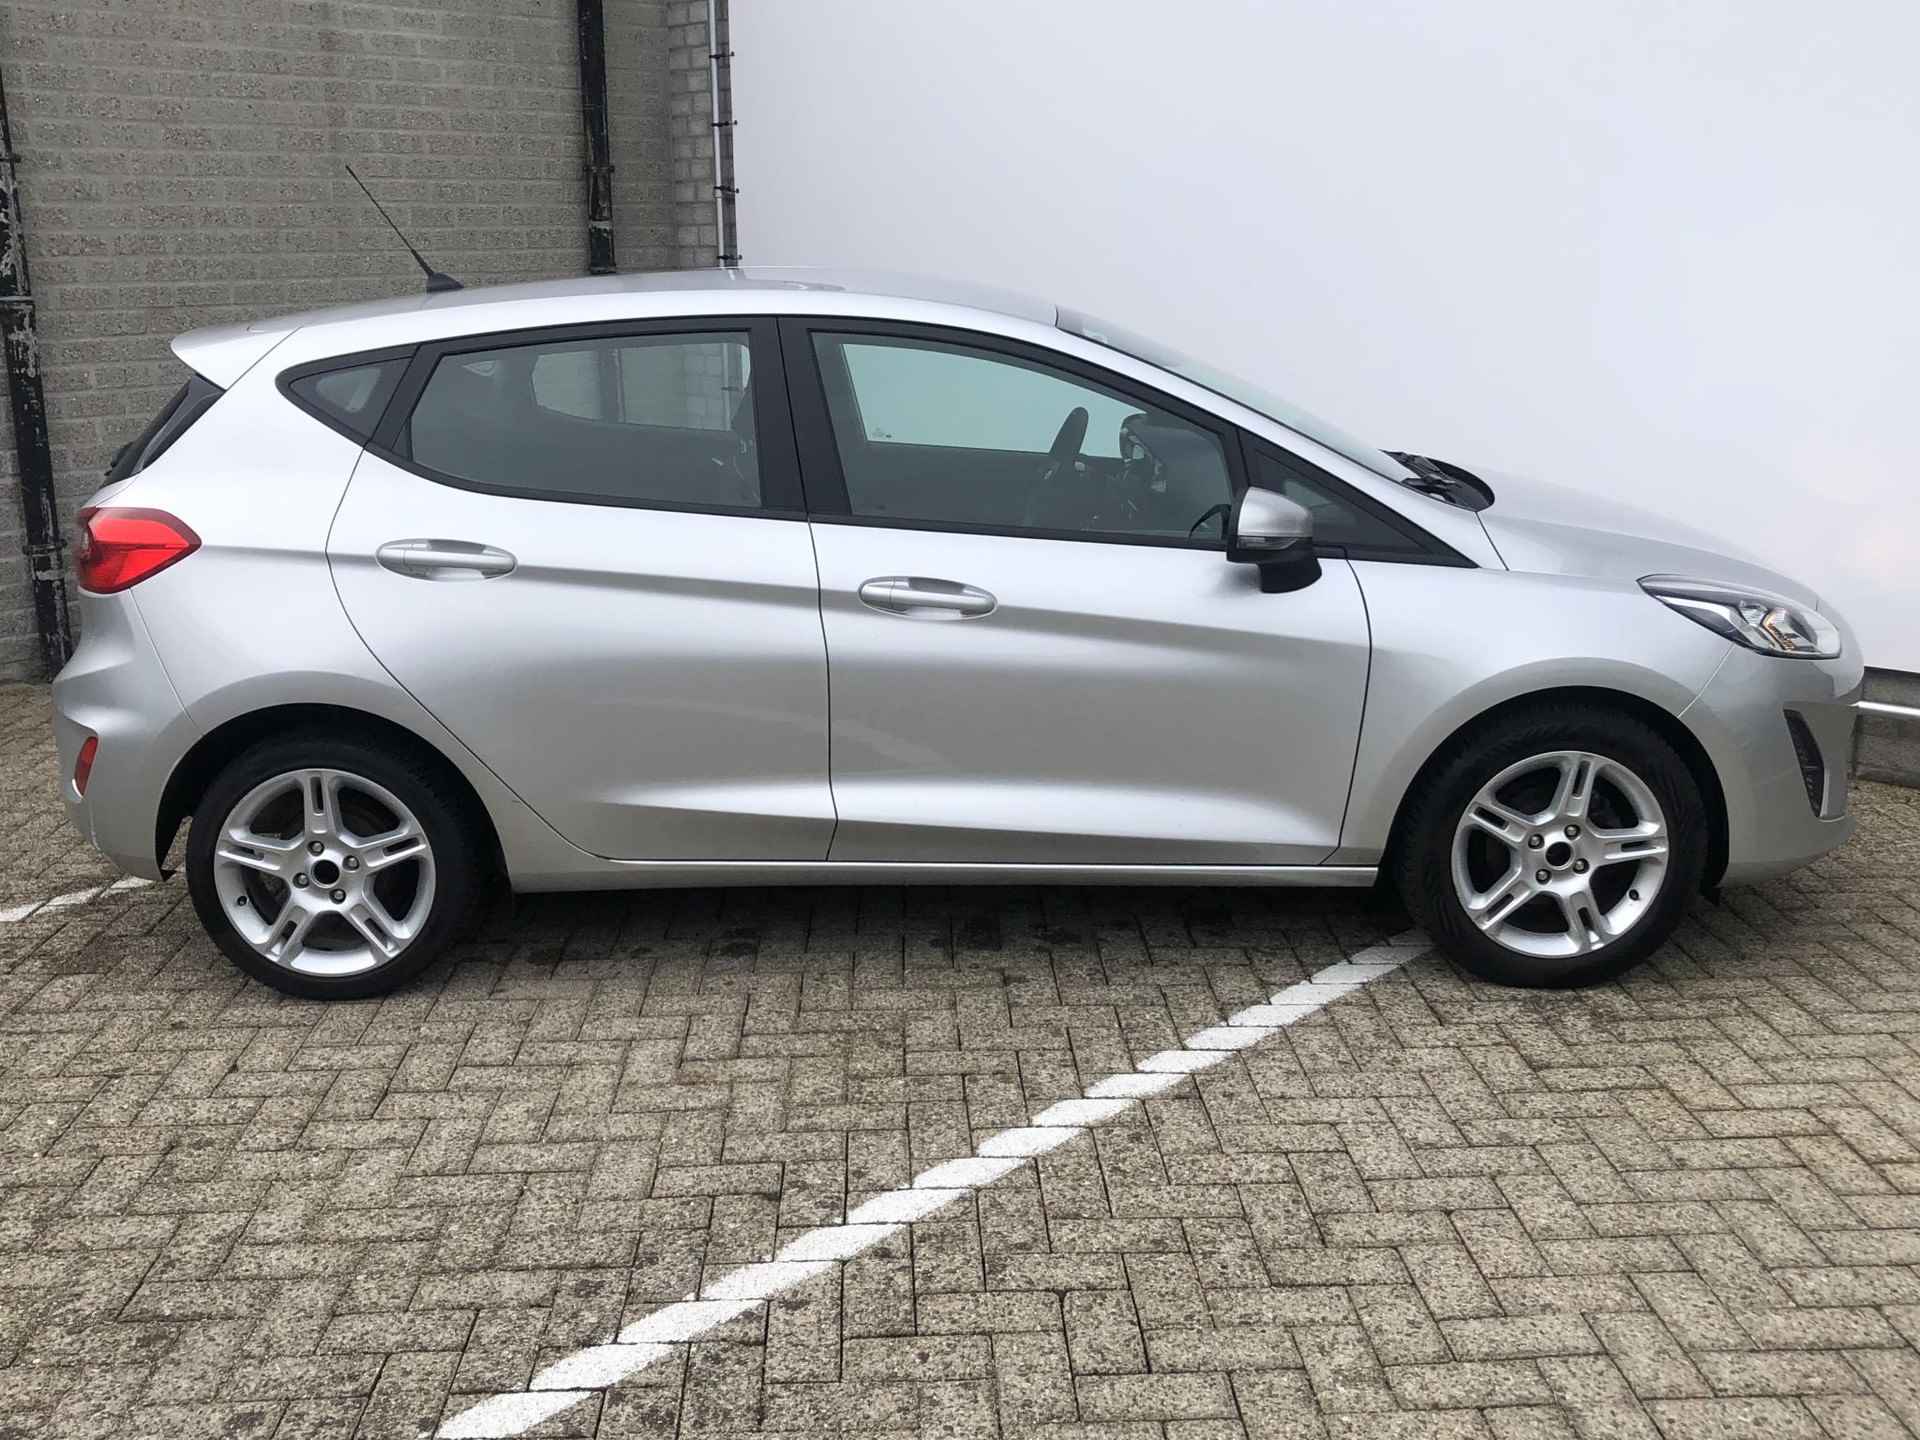 Ford Fiesta 1.1 85pk Trend l Navigatie l Apple Carplay/Android Auto l Airconditioning l Cruise control - 7/23